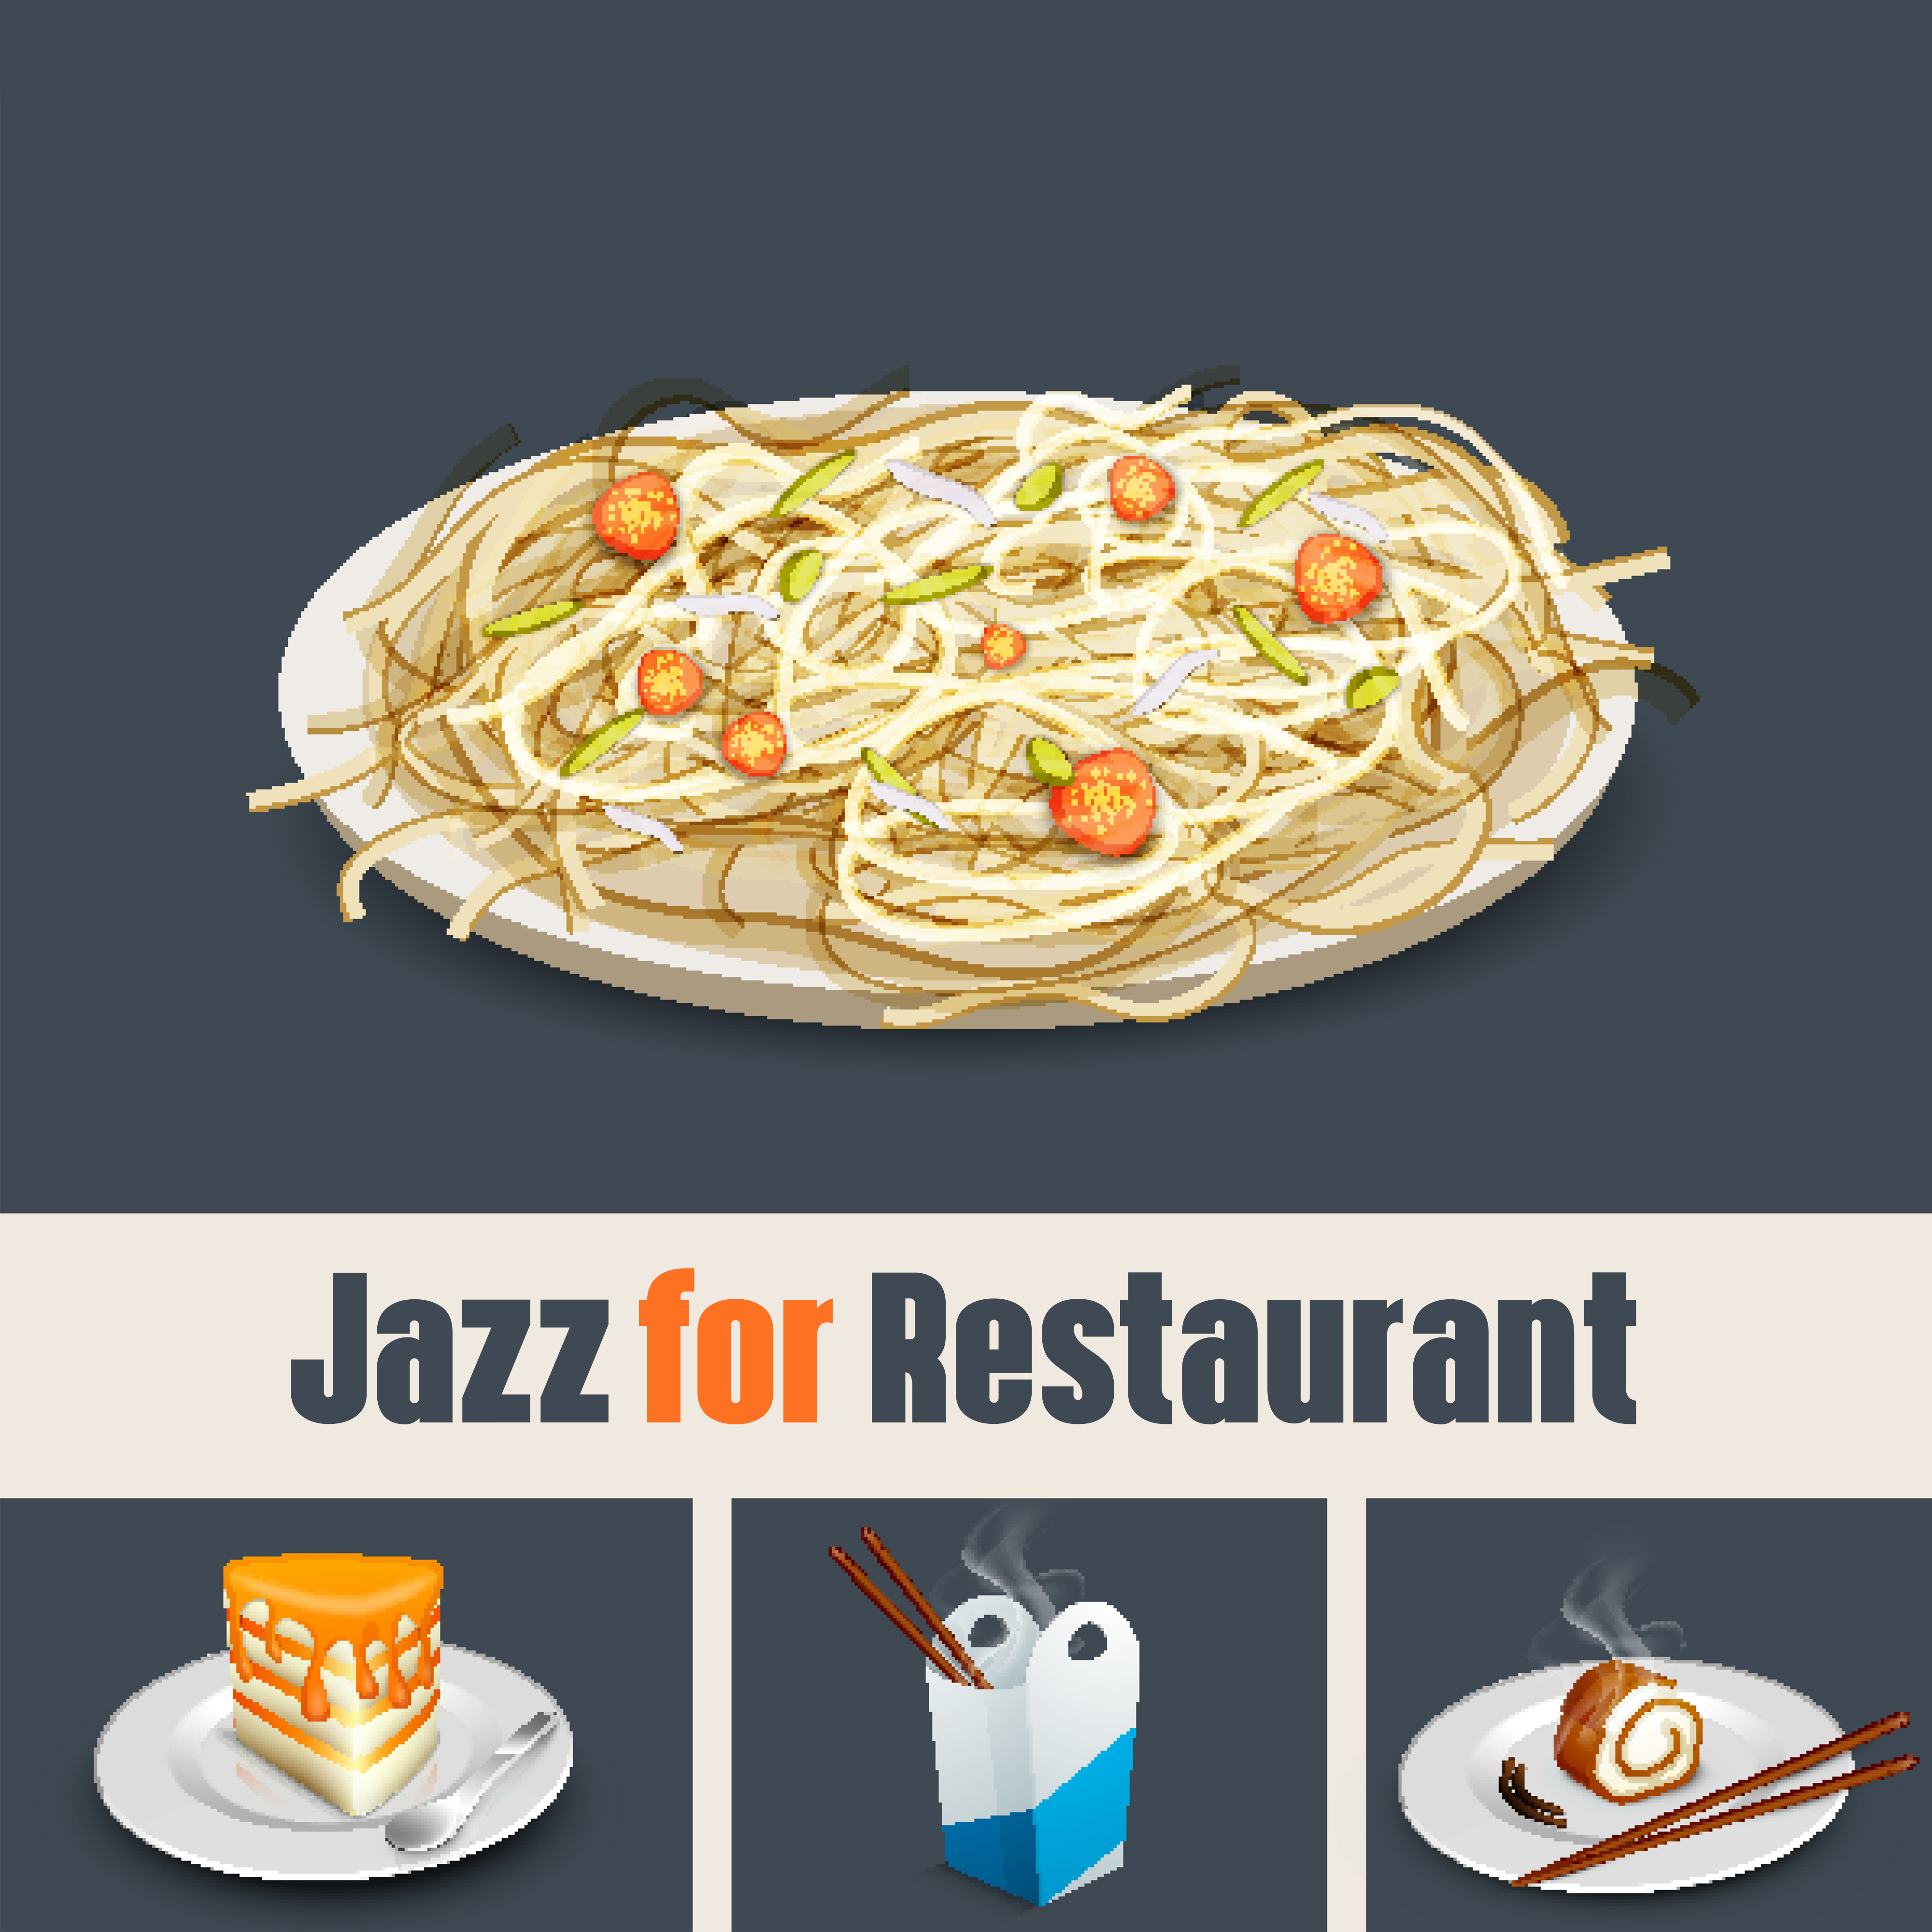 Jazz for Restaurant – Relaxation, Dinner with Family, Soft Piano, Chilled Jazz, Coffee Talk, Rest, Jazz Club